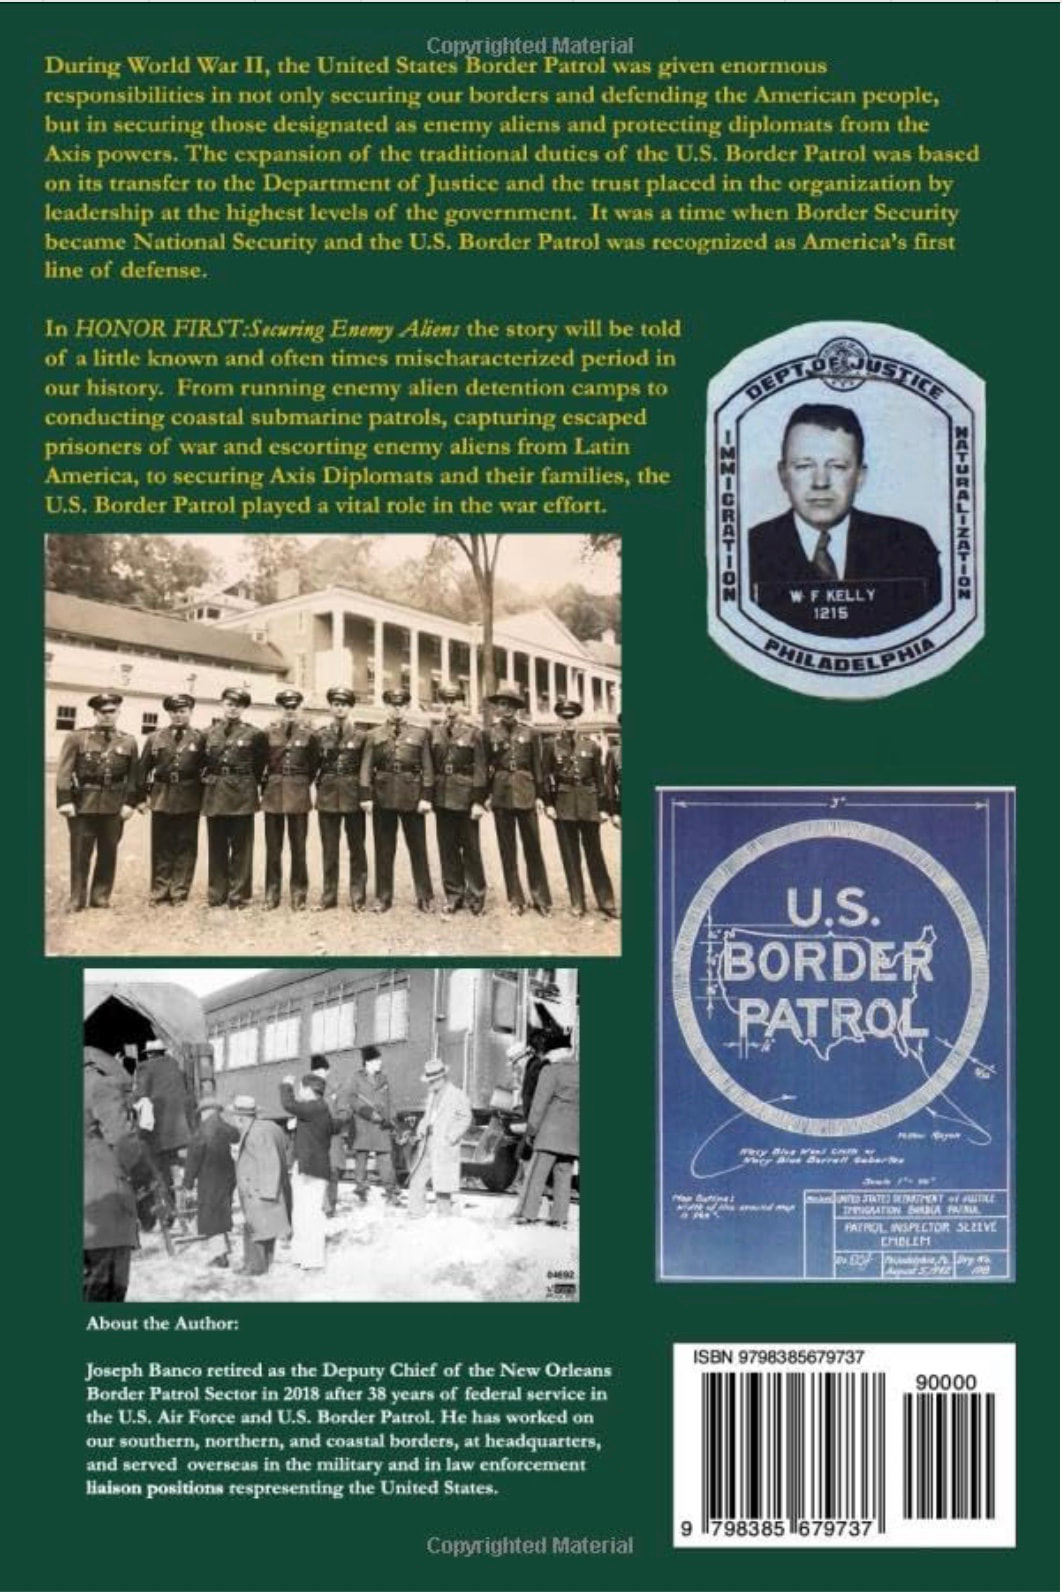 HONOR FIRST: Securing Enemy Aliens - U.S. Border Patrol During World War II (back cover)